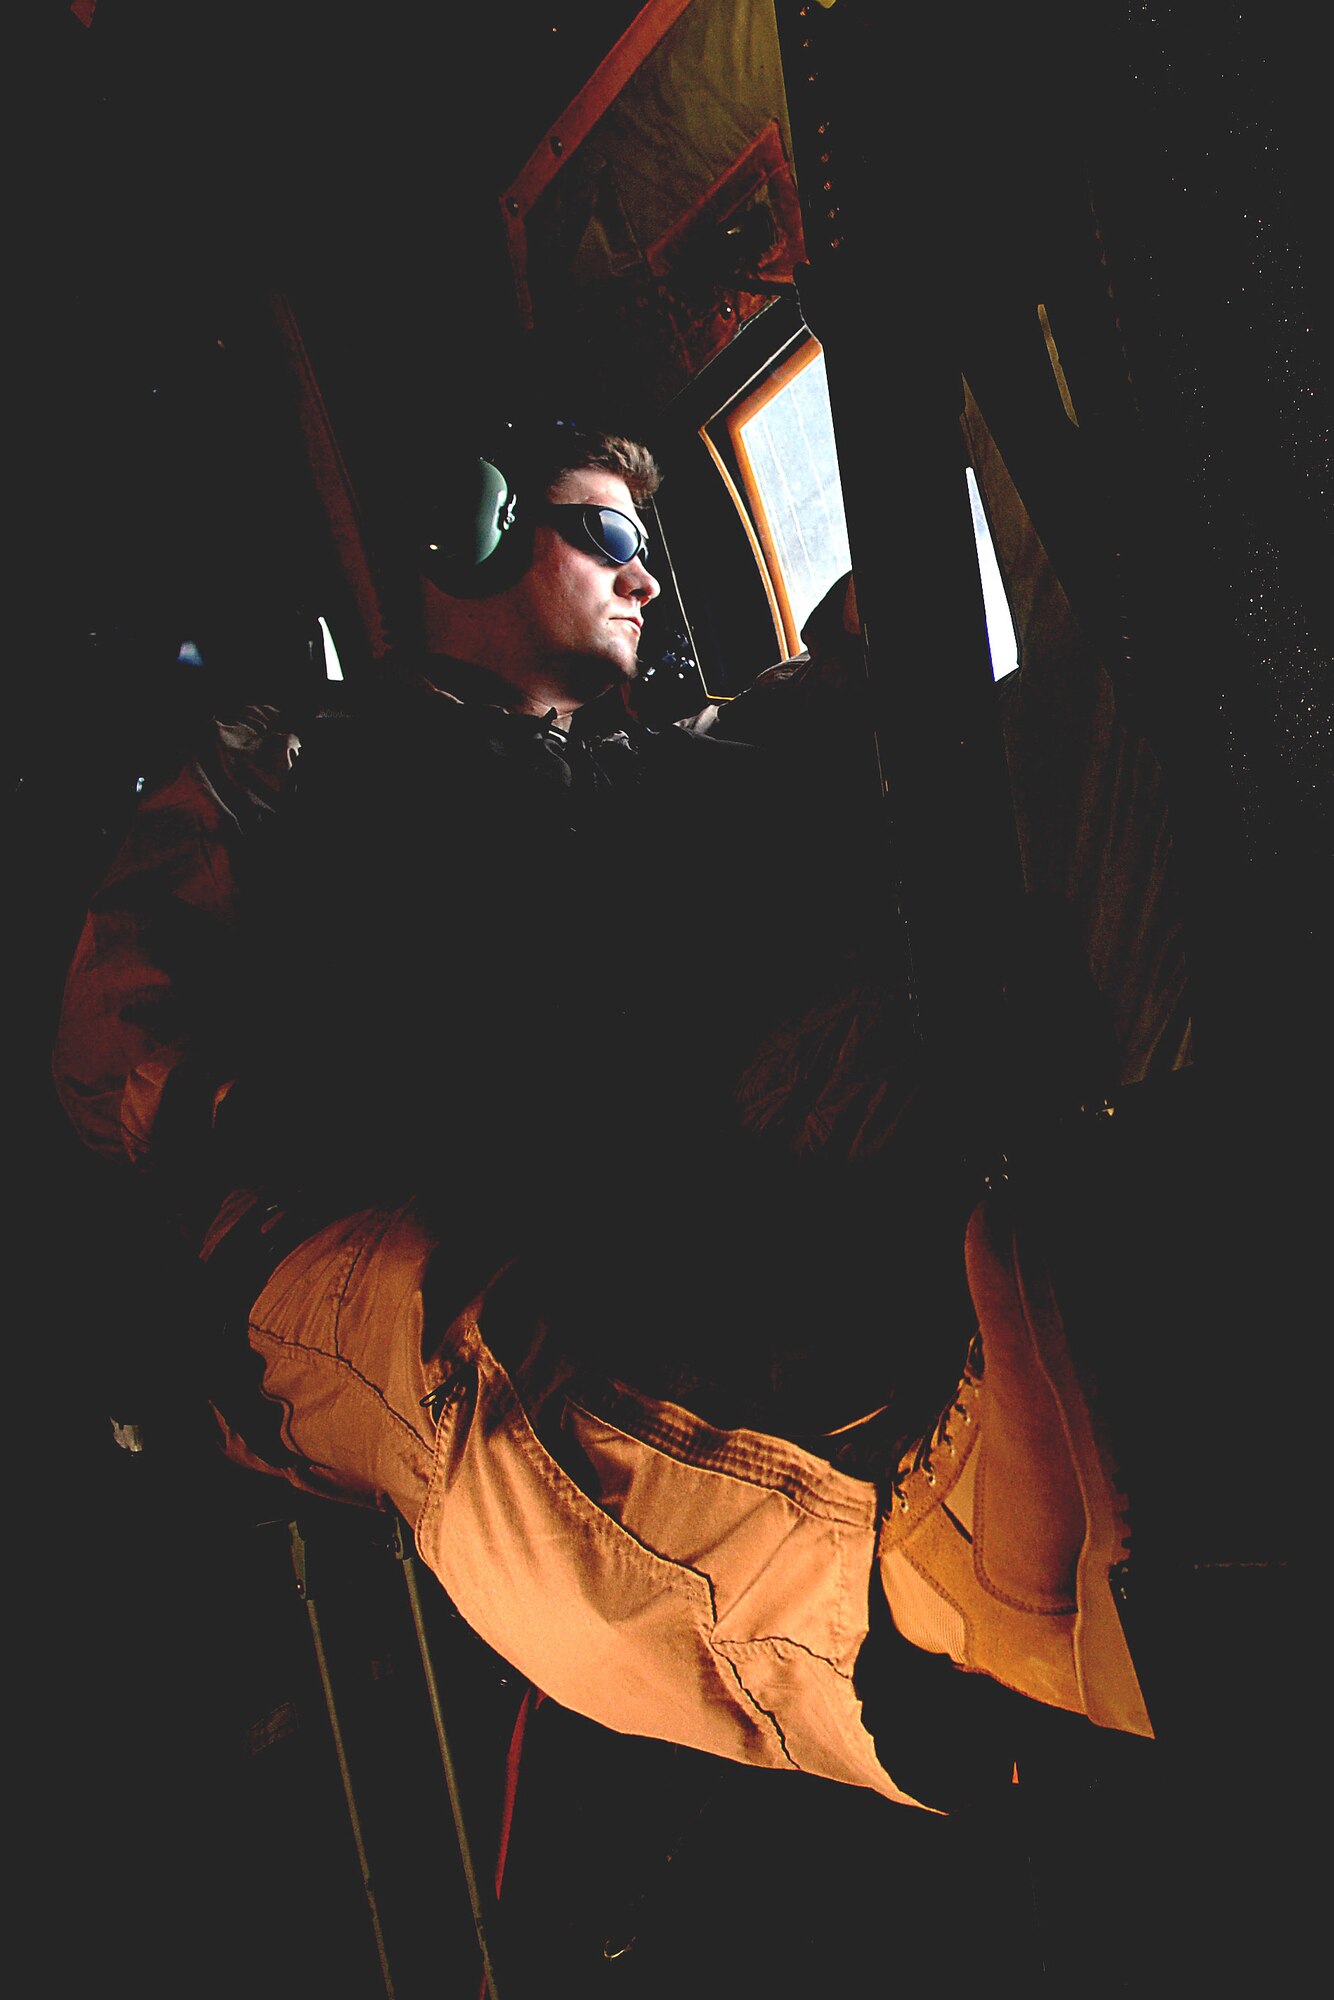 Tech. Sgt. James Floyd scans the sky from the jump door window of an HC-130 Hercules during a mission June 3 off the coast of Djibouti. Sergeant Floyd is deployed to Combined Joint Task Force-Horn of Africa out of Camp Lemonier, Djibouti. The aircraft loadmaster is with the 71st Search and Rescue Squadron at Moody Air Force Base, Ga. (U.S. Air Force photo/Tech. Sgt. Jeremy T. Lock) 